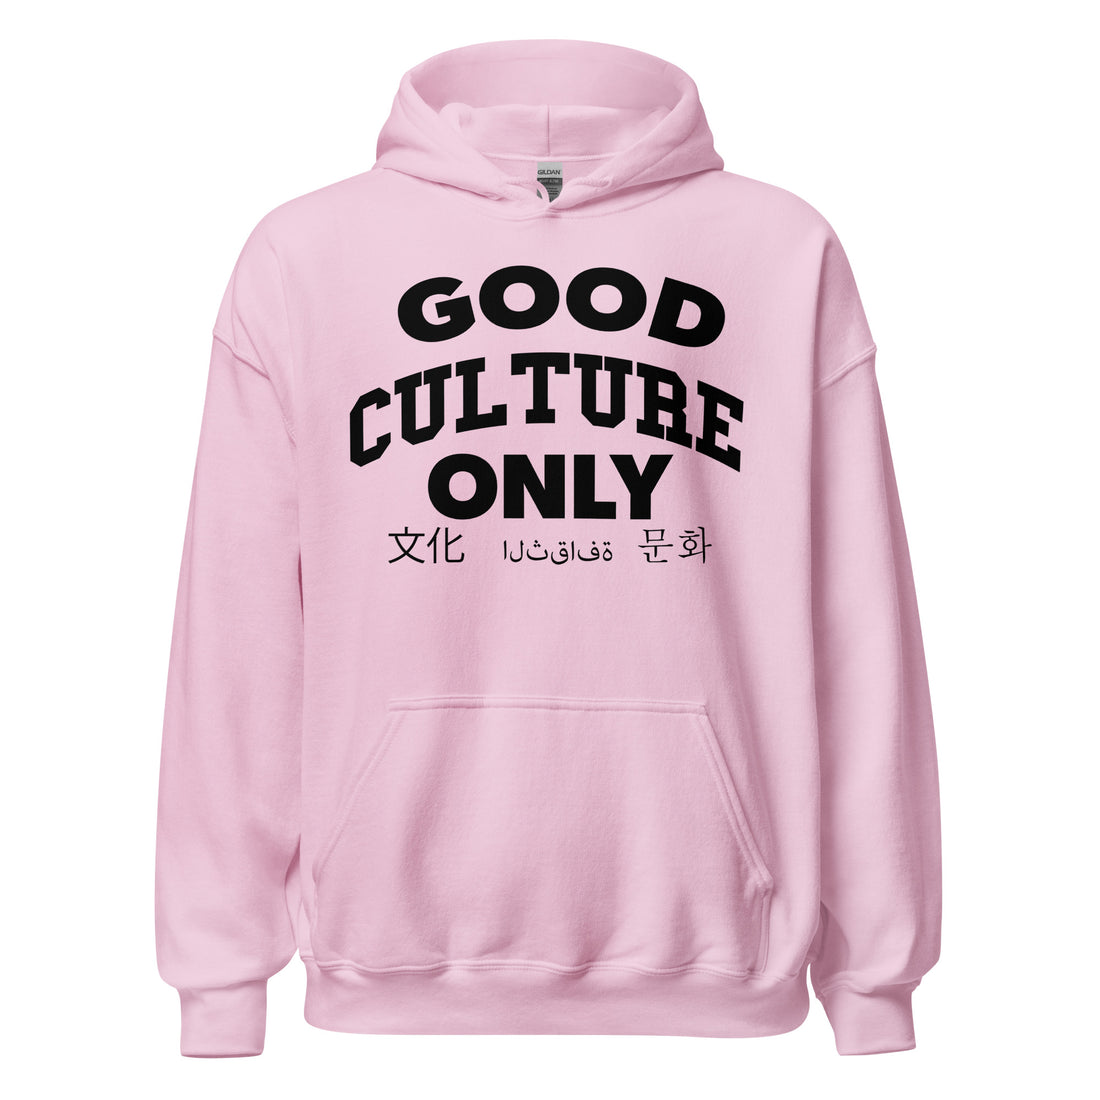 Good Culture Only